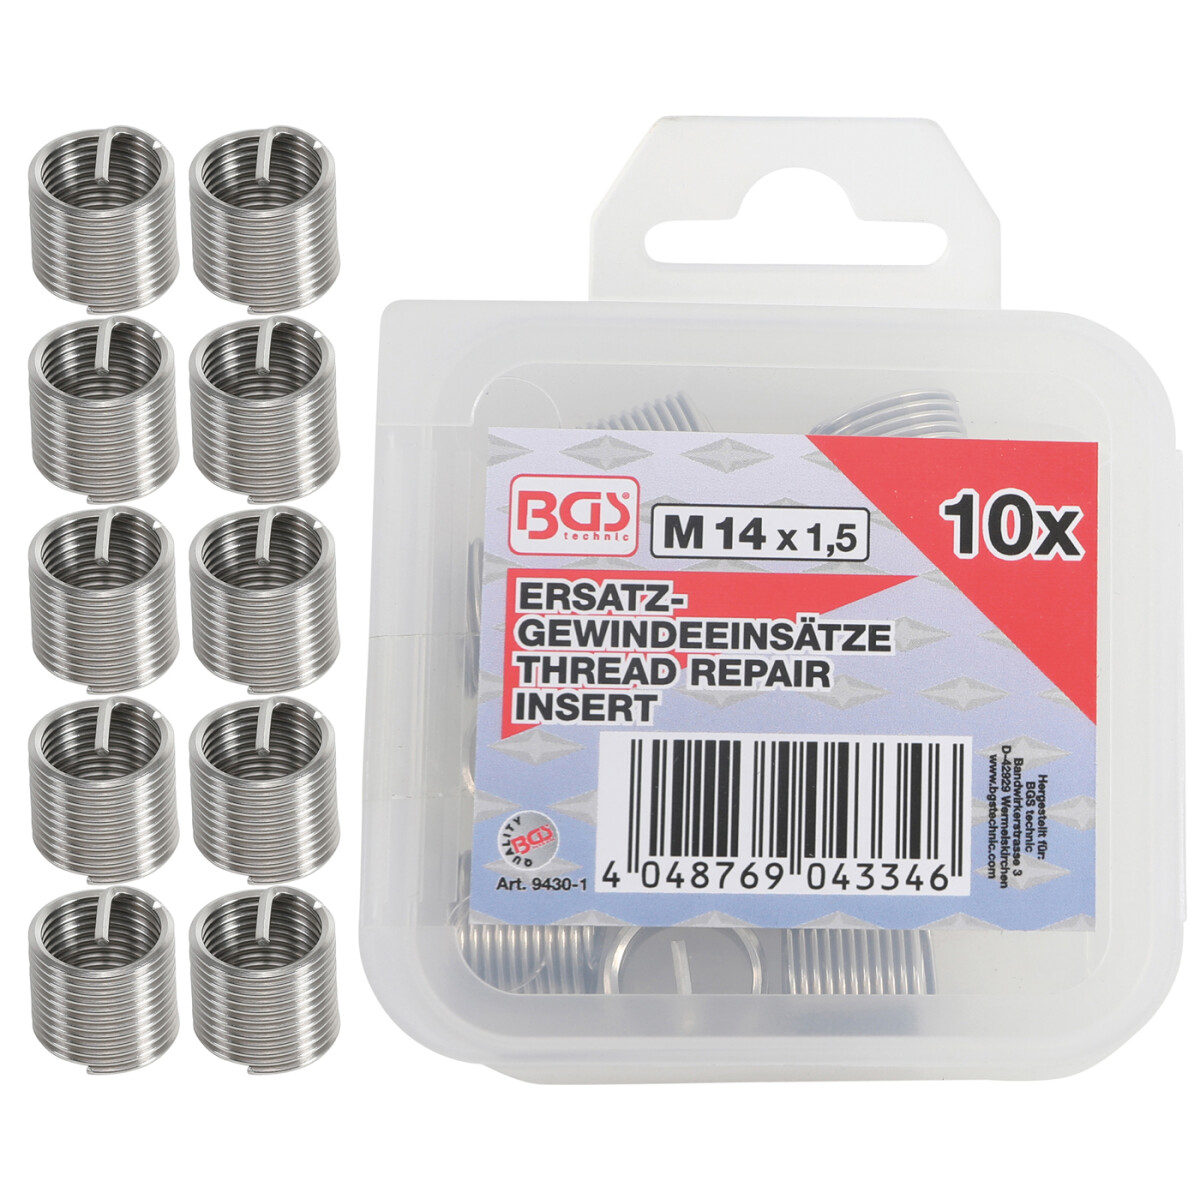 BGS Replacement Thread Inserts | M14 x 1.5 mm | 10 pcs....